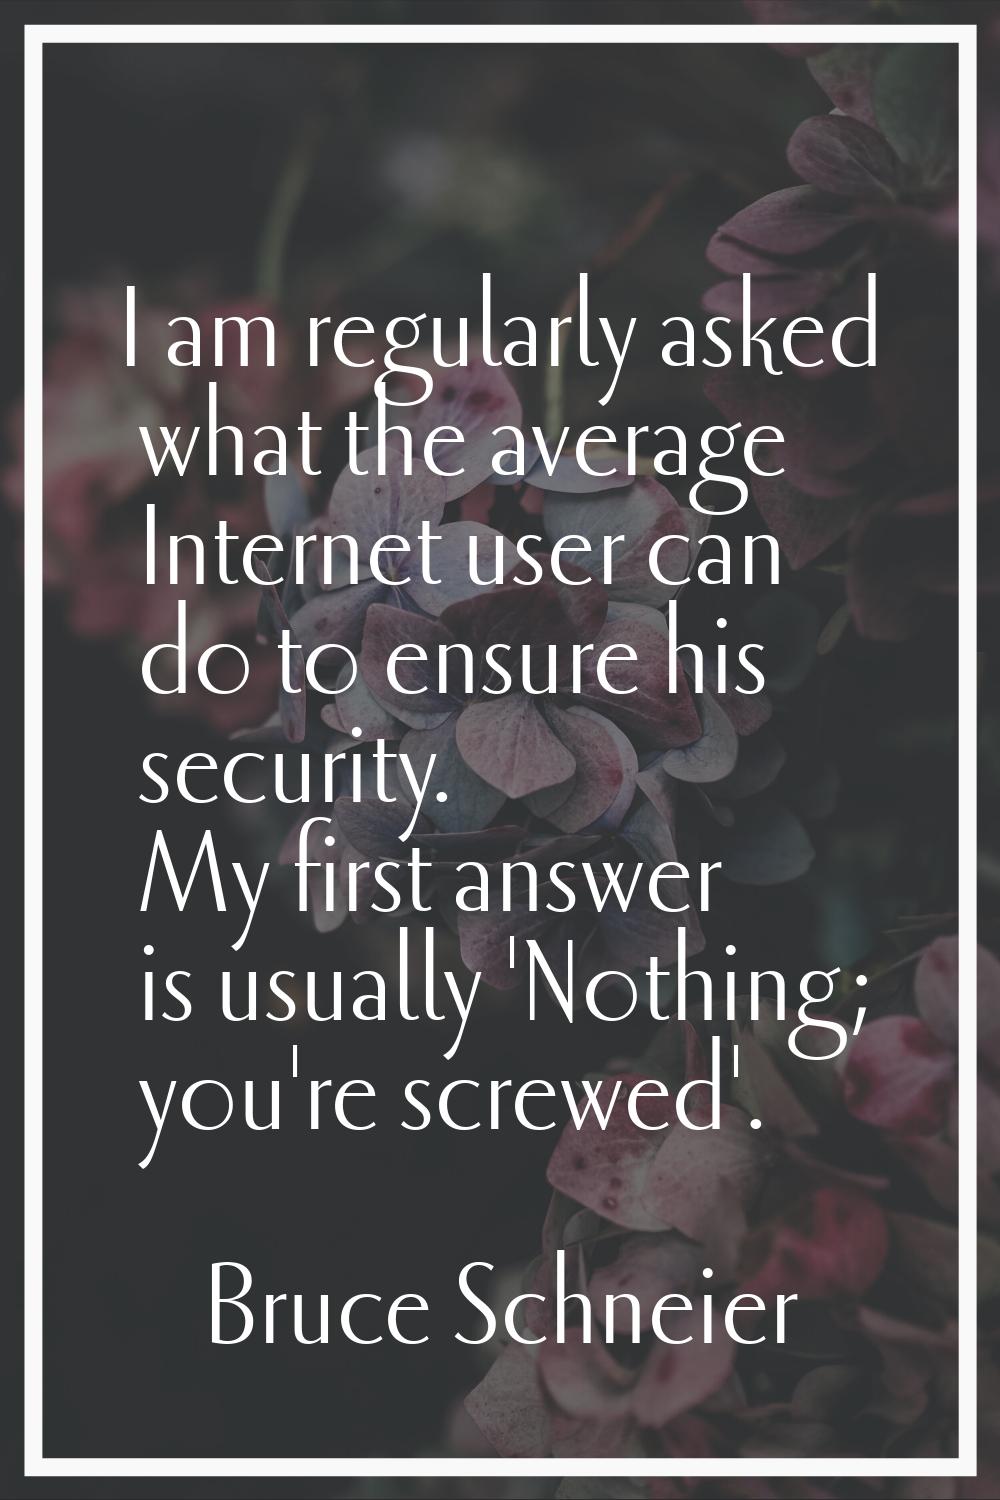 I am regularly asked what the average Internet user can do to ensure his security. My first answer 